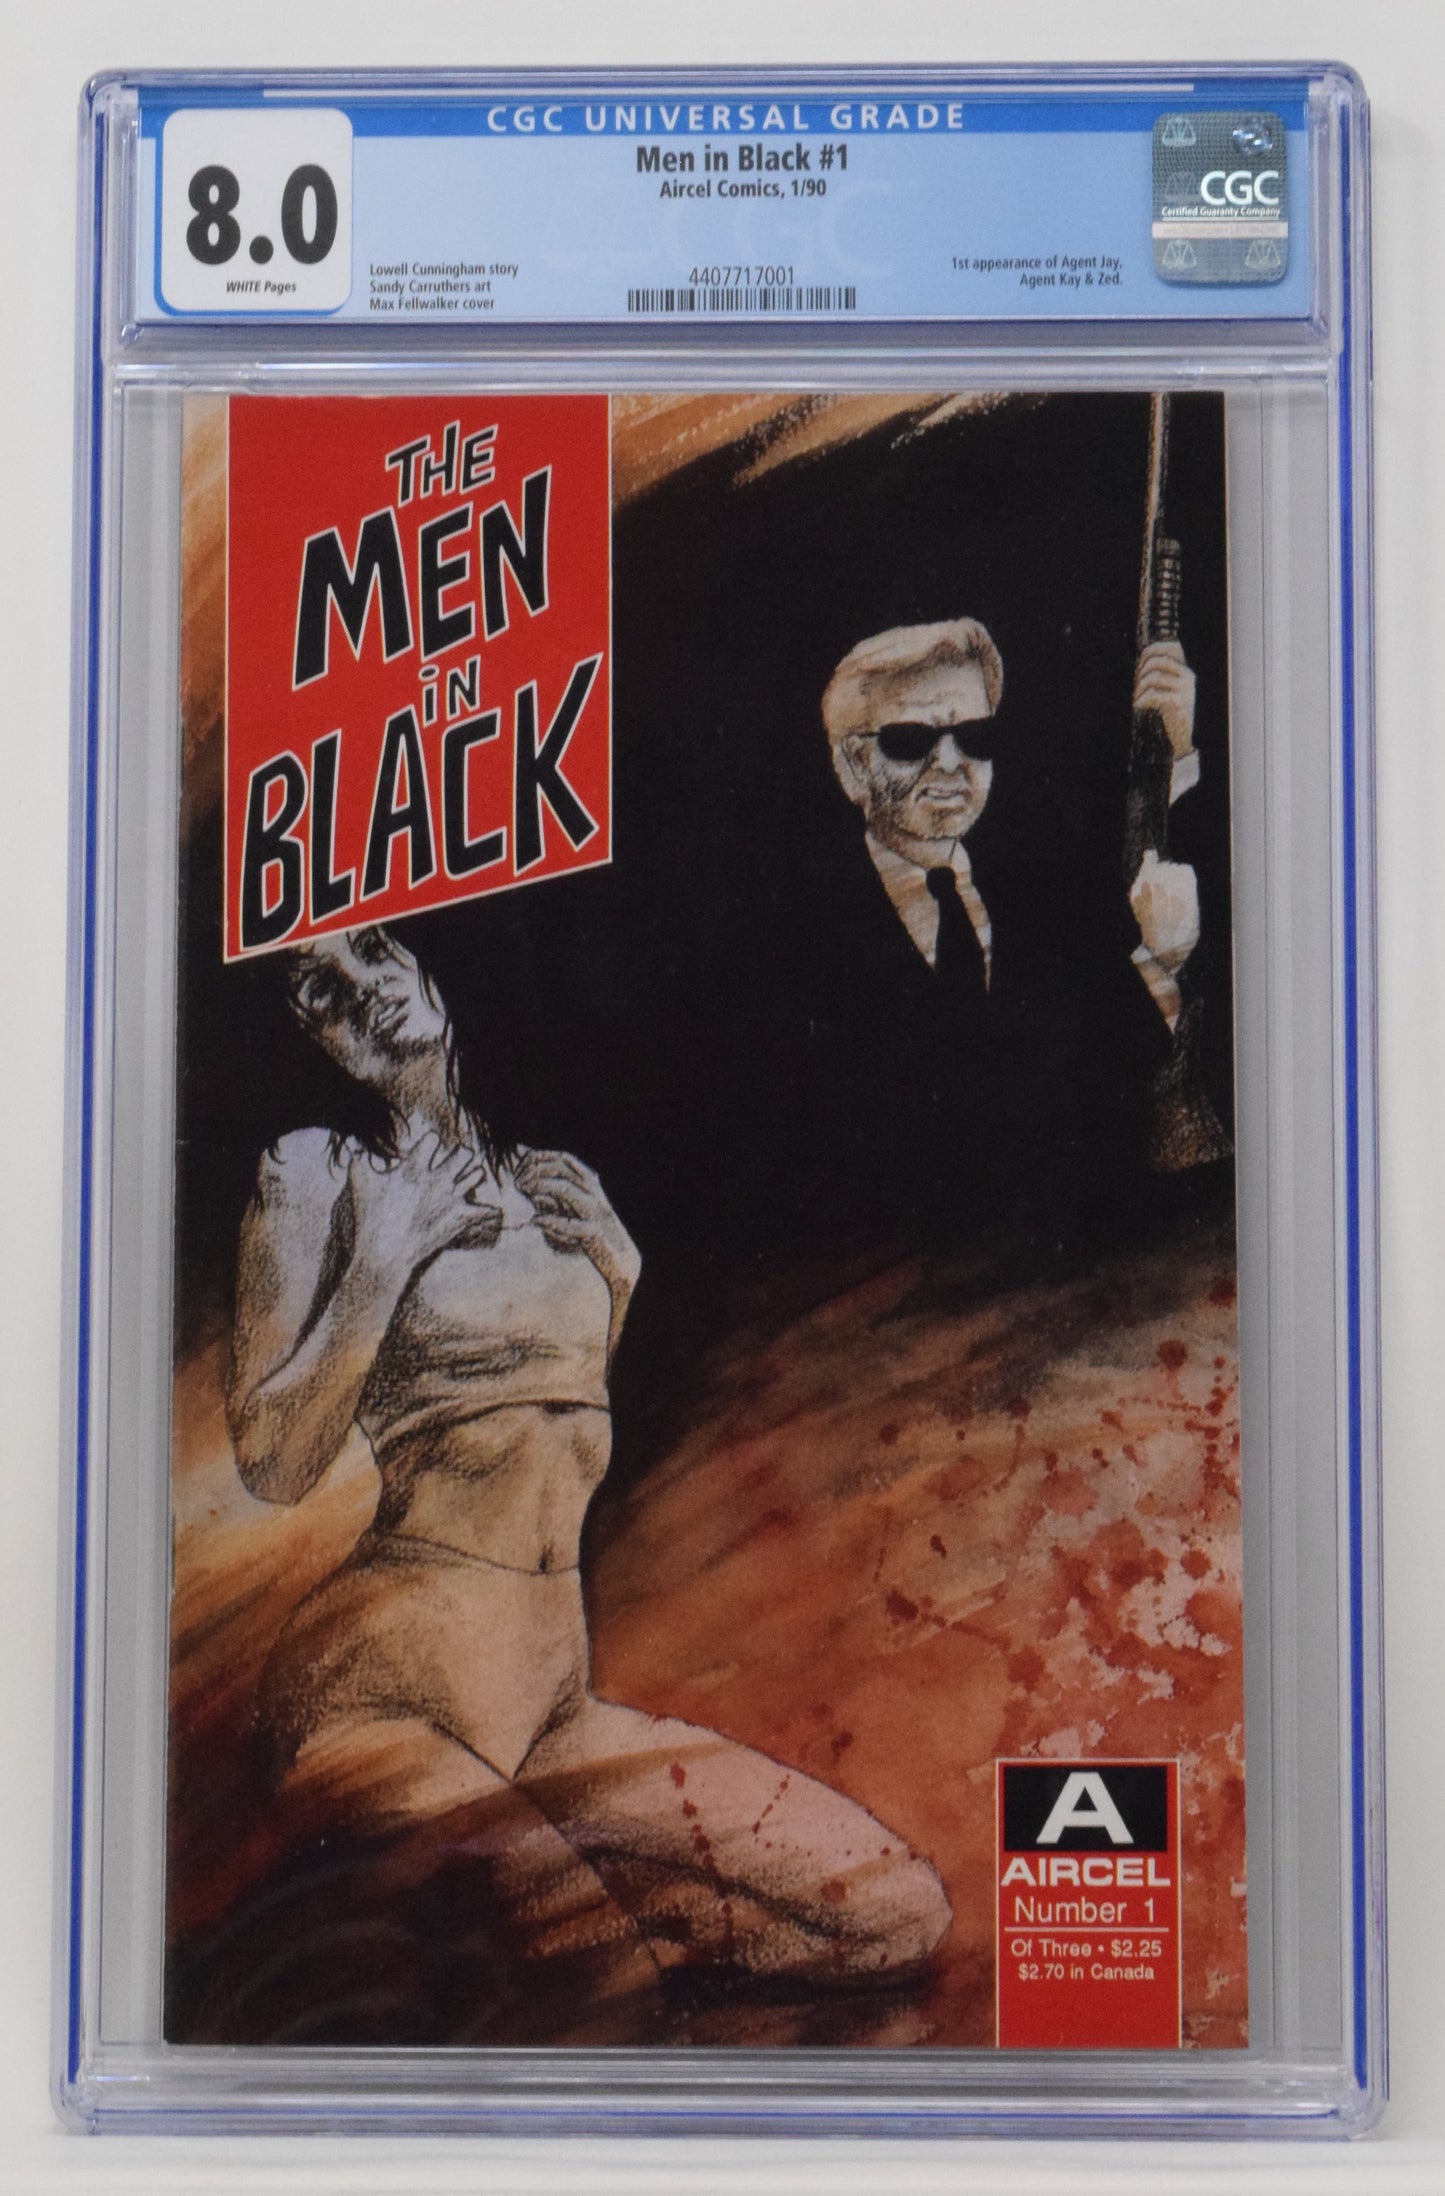 Men In Black 1 Aircel CGC 8.0 1st Jay Kay Zed Movie Will Smith